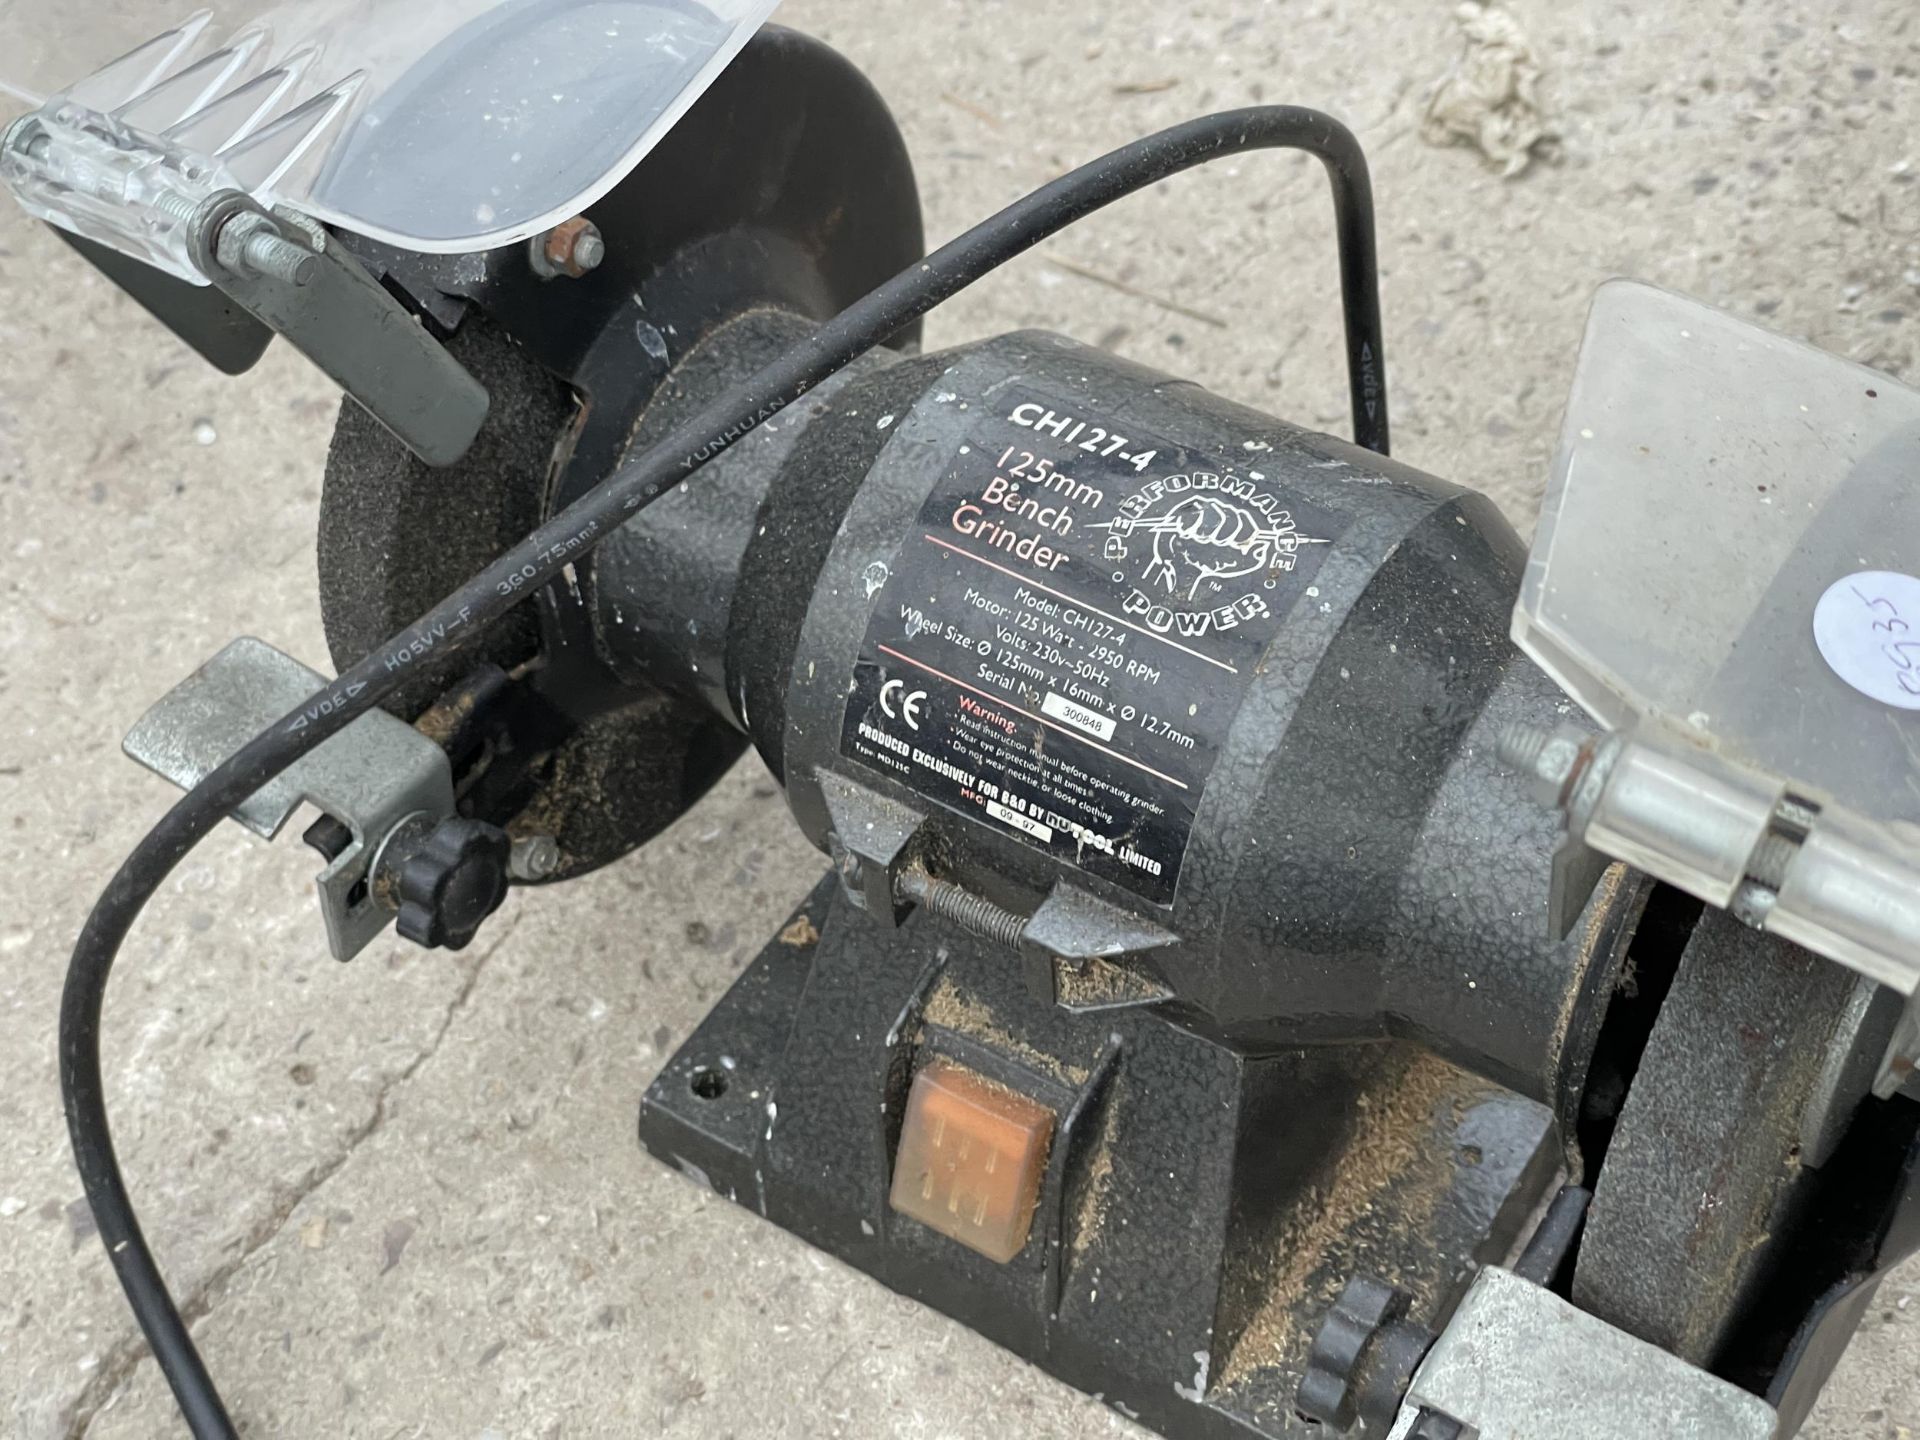 A PERFORMANCE POWER DOUBLE ENDED BENCH GRINDER - Image 2 of 2